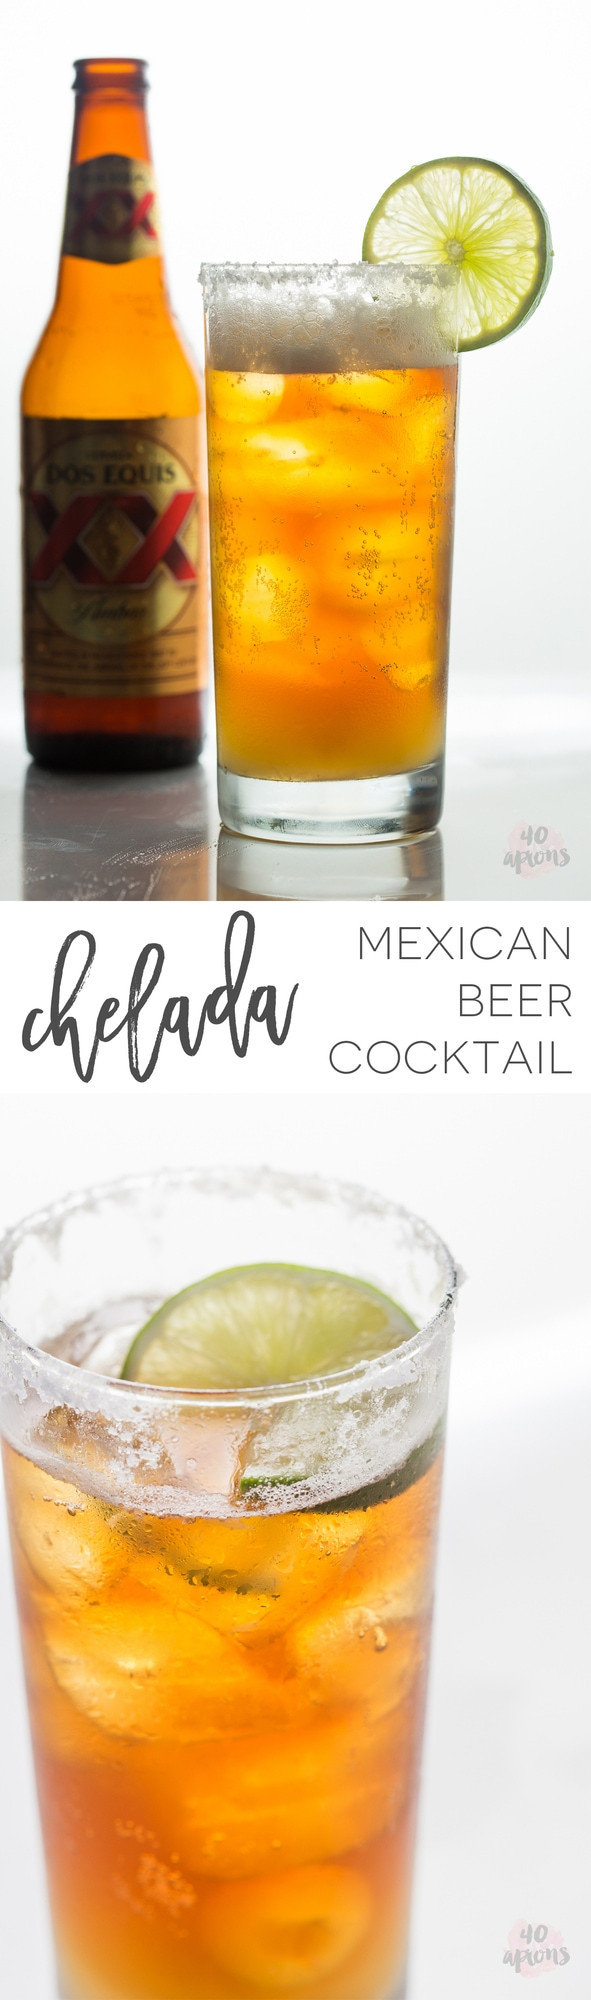 Mexican Beer Cocktails
 Chelada Mexican Beer Cocktail 40 Aprons